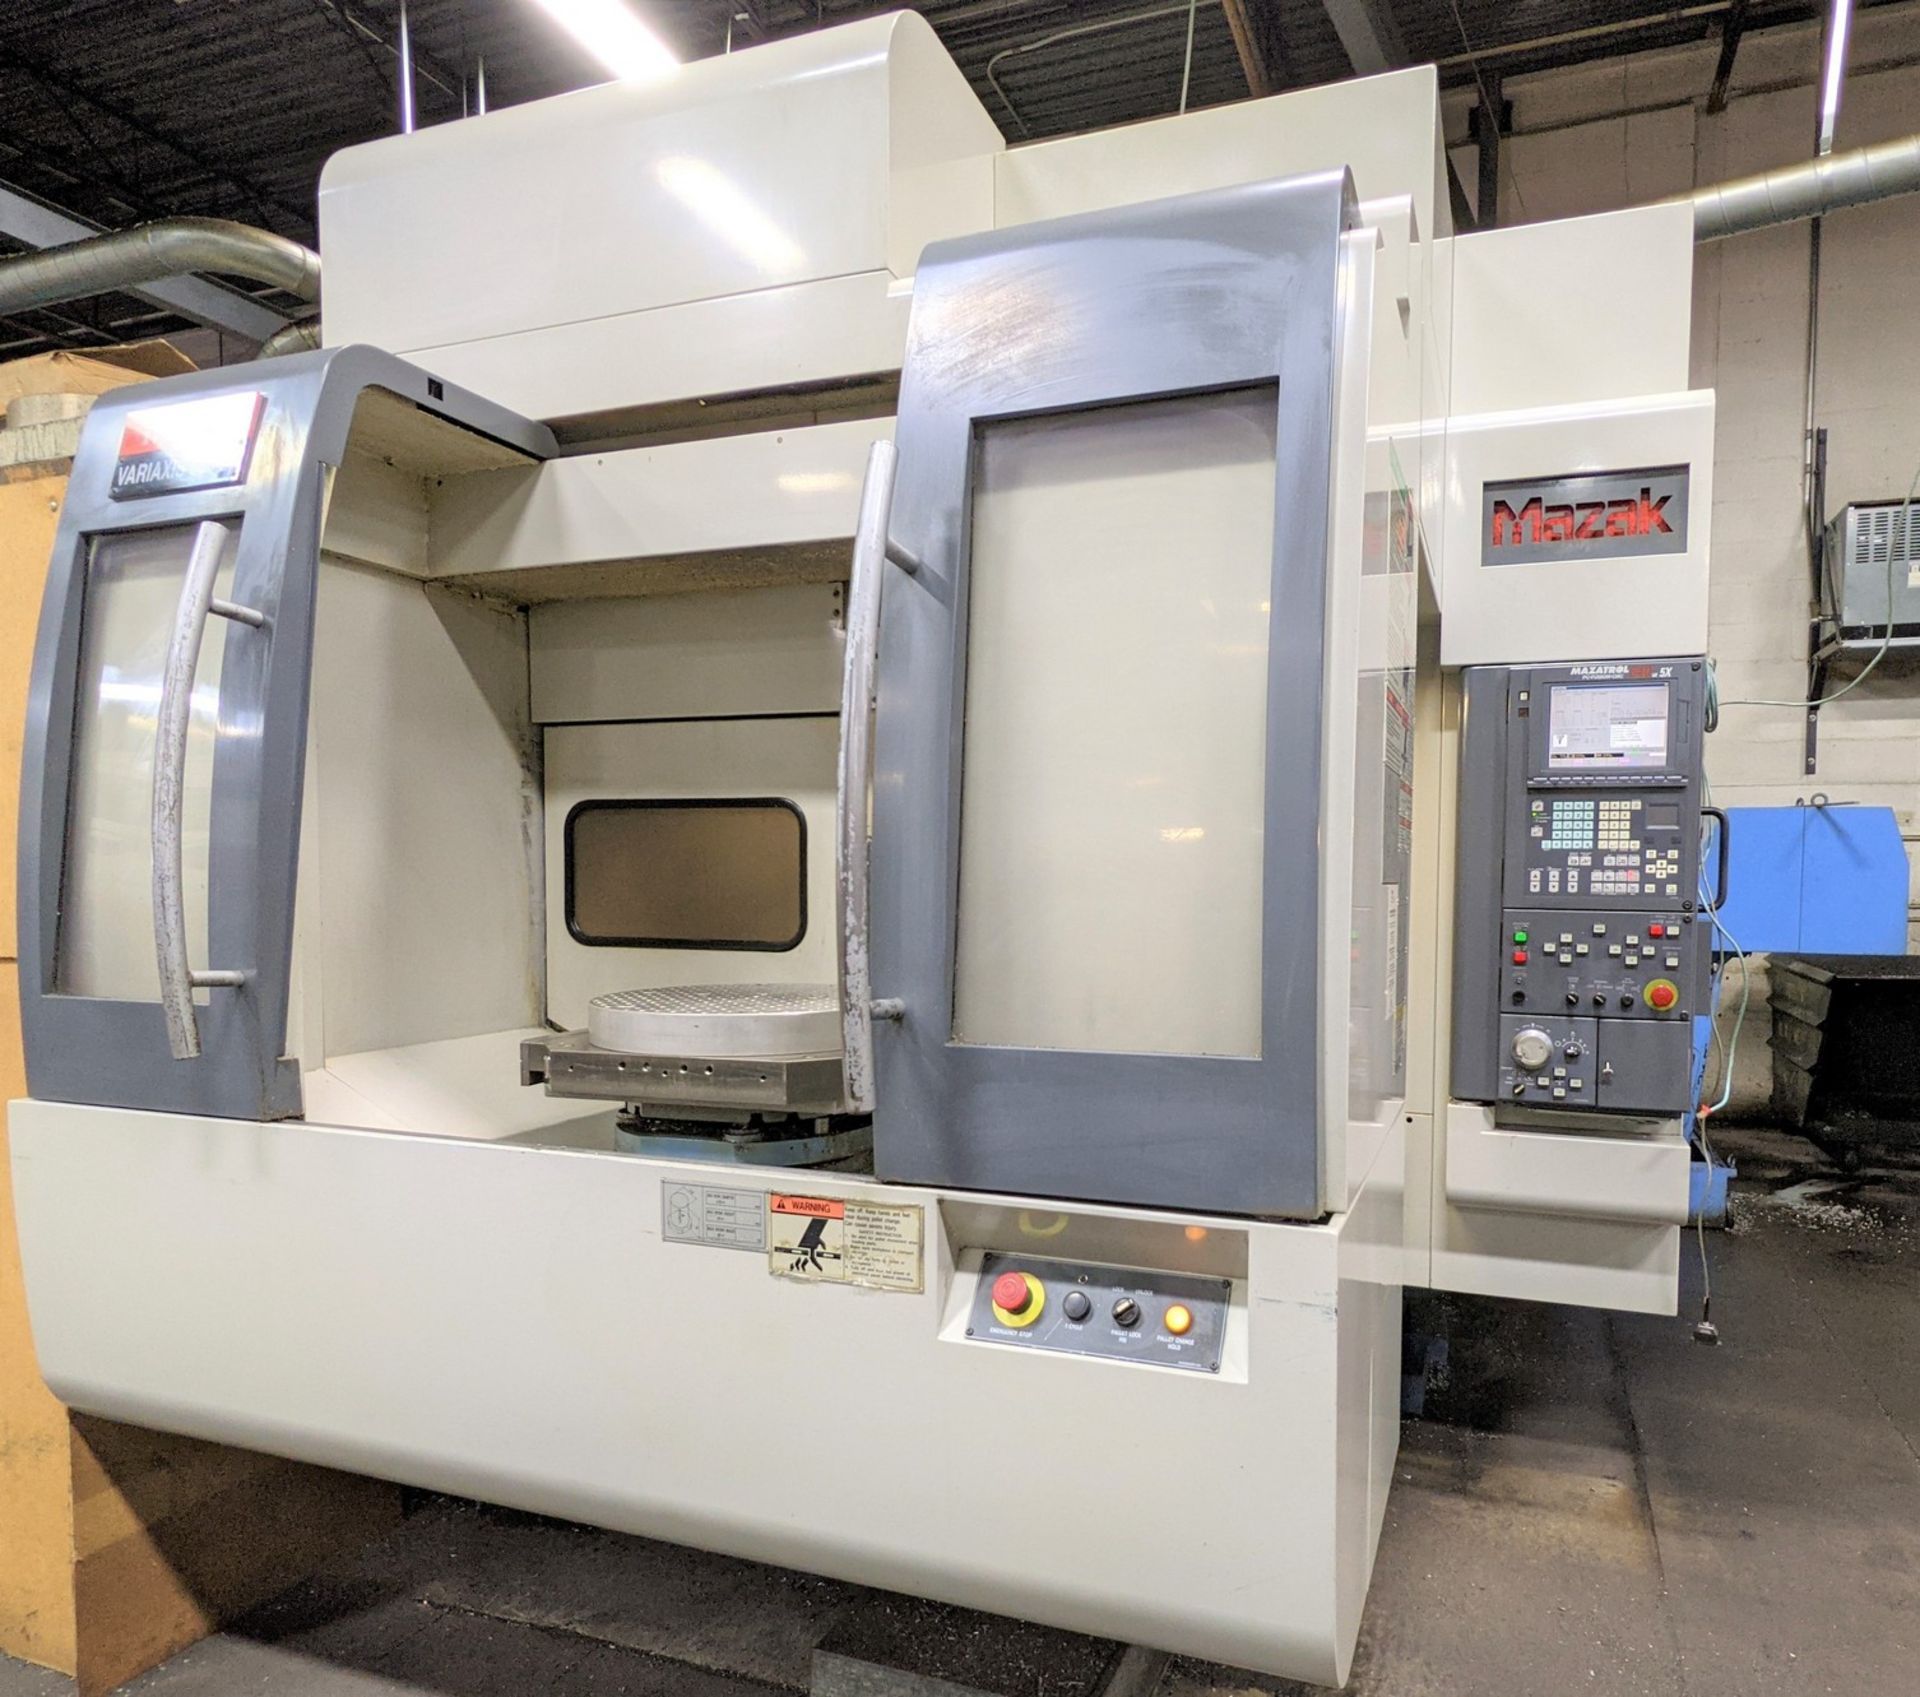 MAZAK VARIAXIS 630 5-AXIS CNC VERTIVAL MACHINING CENTER W/PALLET CHANGER, S/N 160371, NEW 2002 - Image 2 of 19